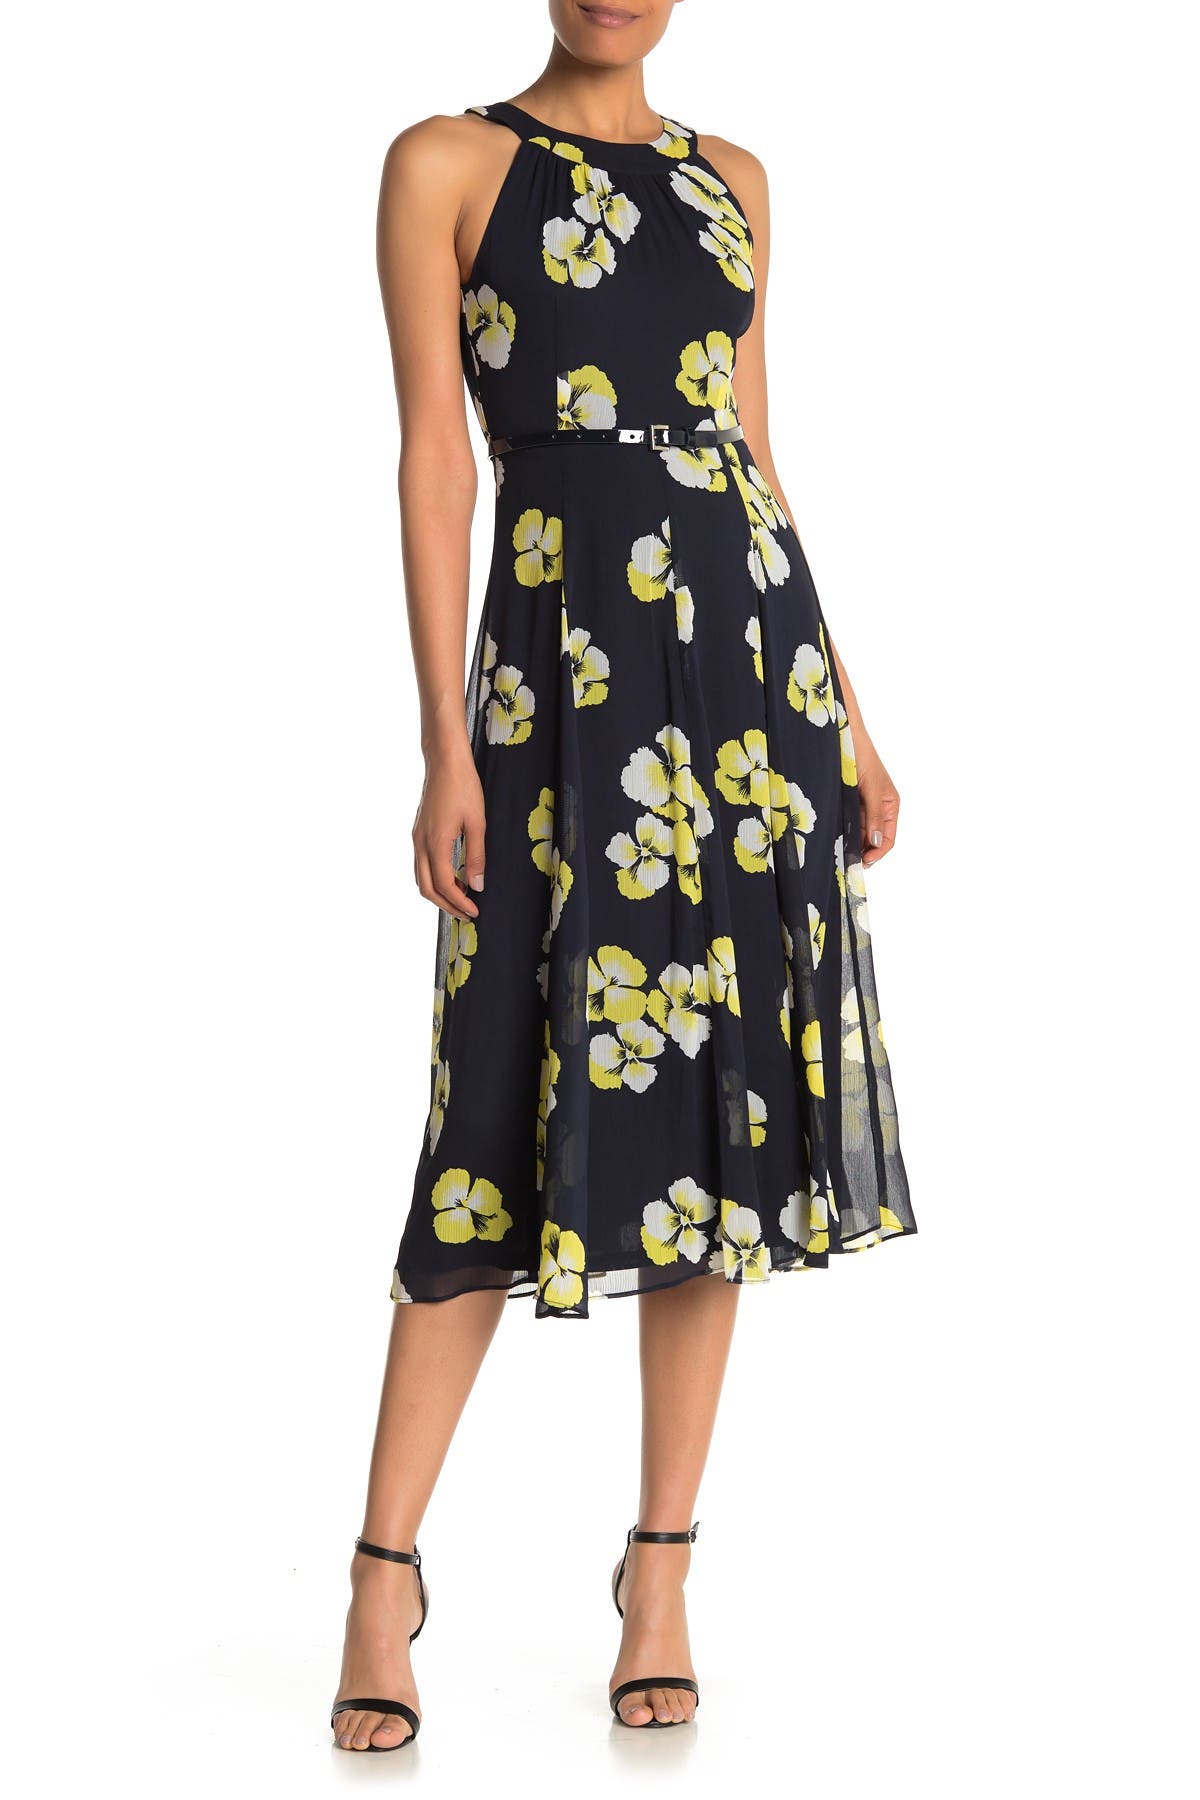 tommy hilfiger yellow floral dress